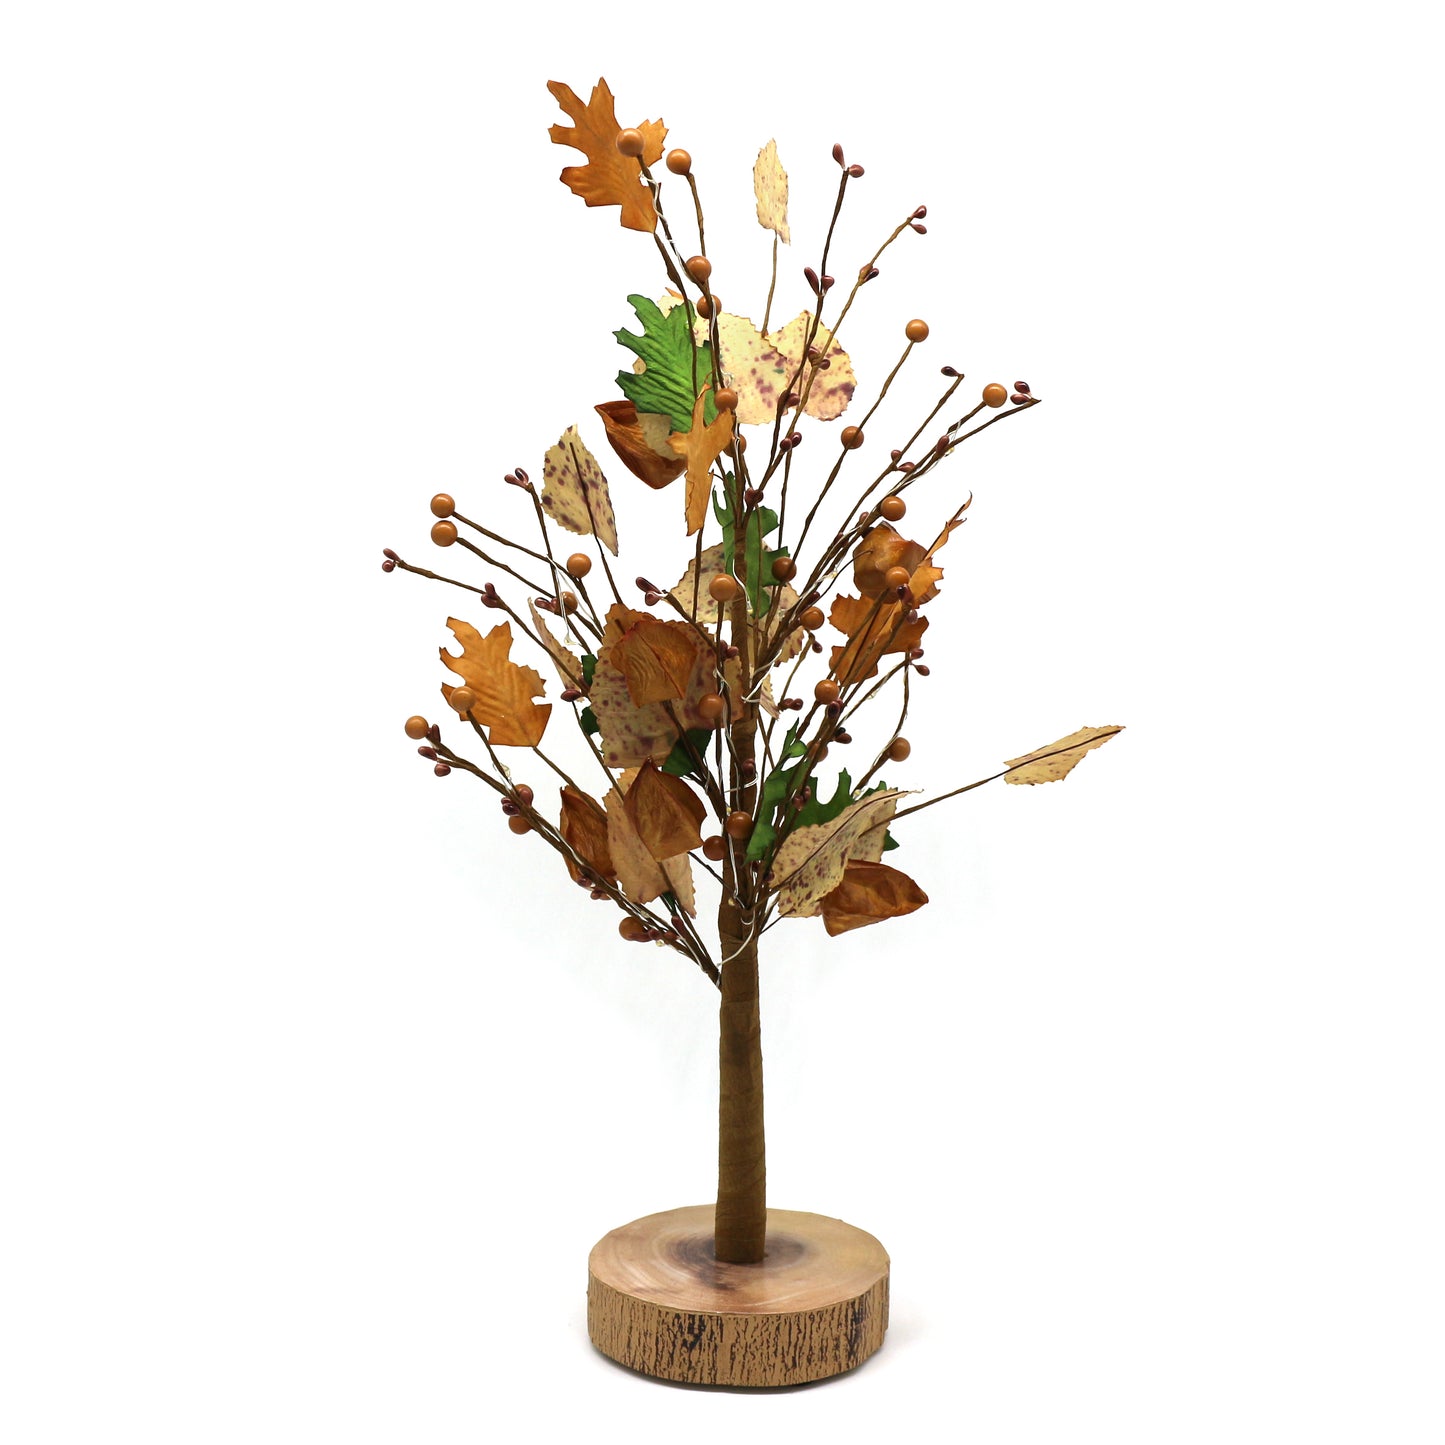 CVHOMEDECO. Battery Operated w/Timer Lighted Fall Tree Tabletop LED Light, 20 Warm White LEDs, Rustic Vintage Wooden base, For Home/Party/ Wedding/Festival/Indoor Decoration, 21 Inch